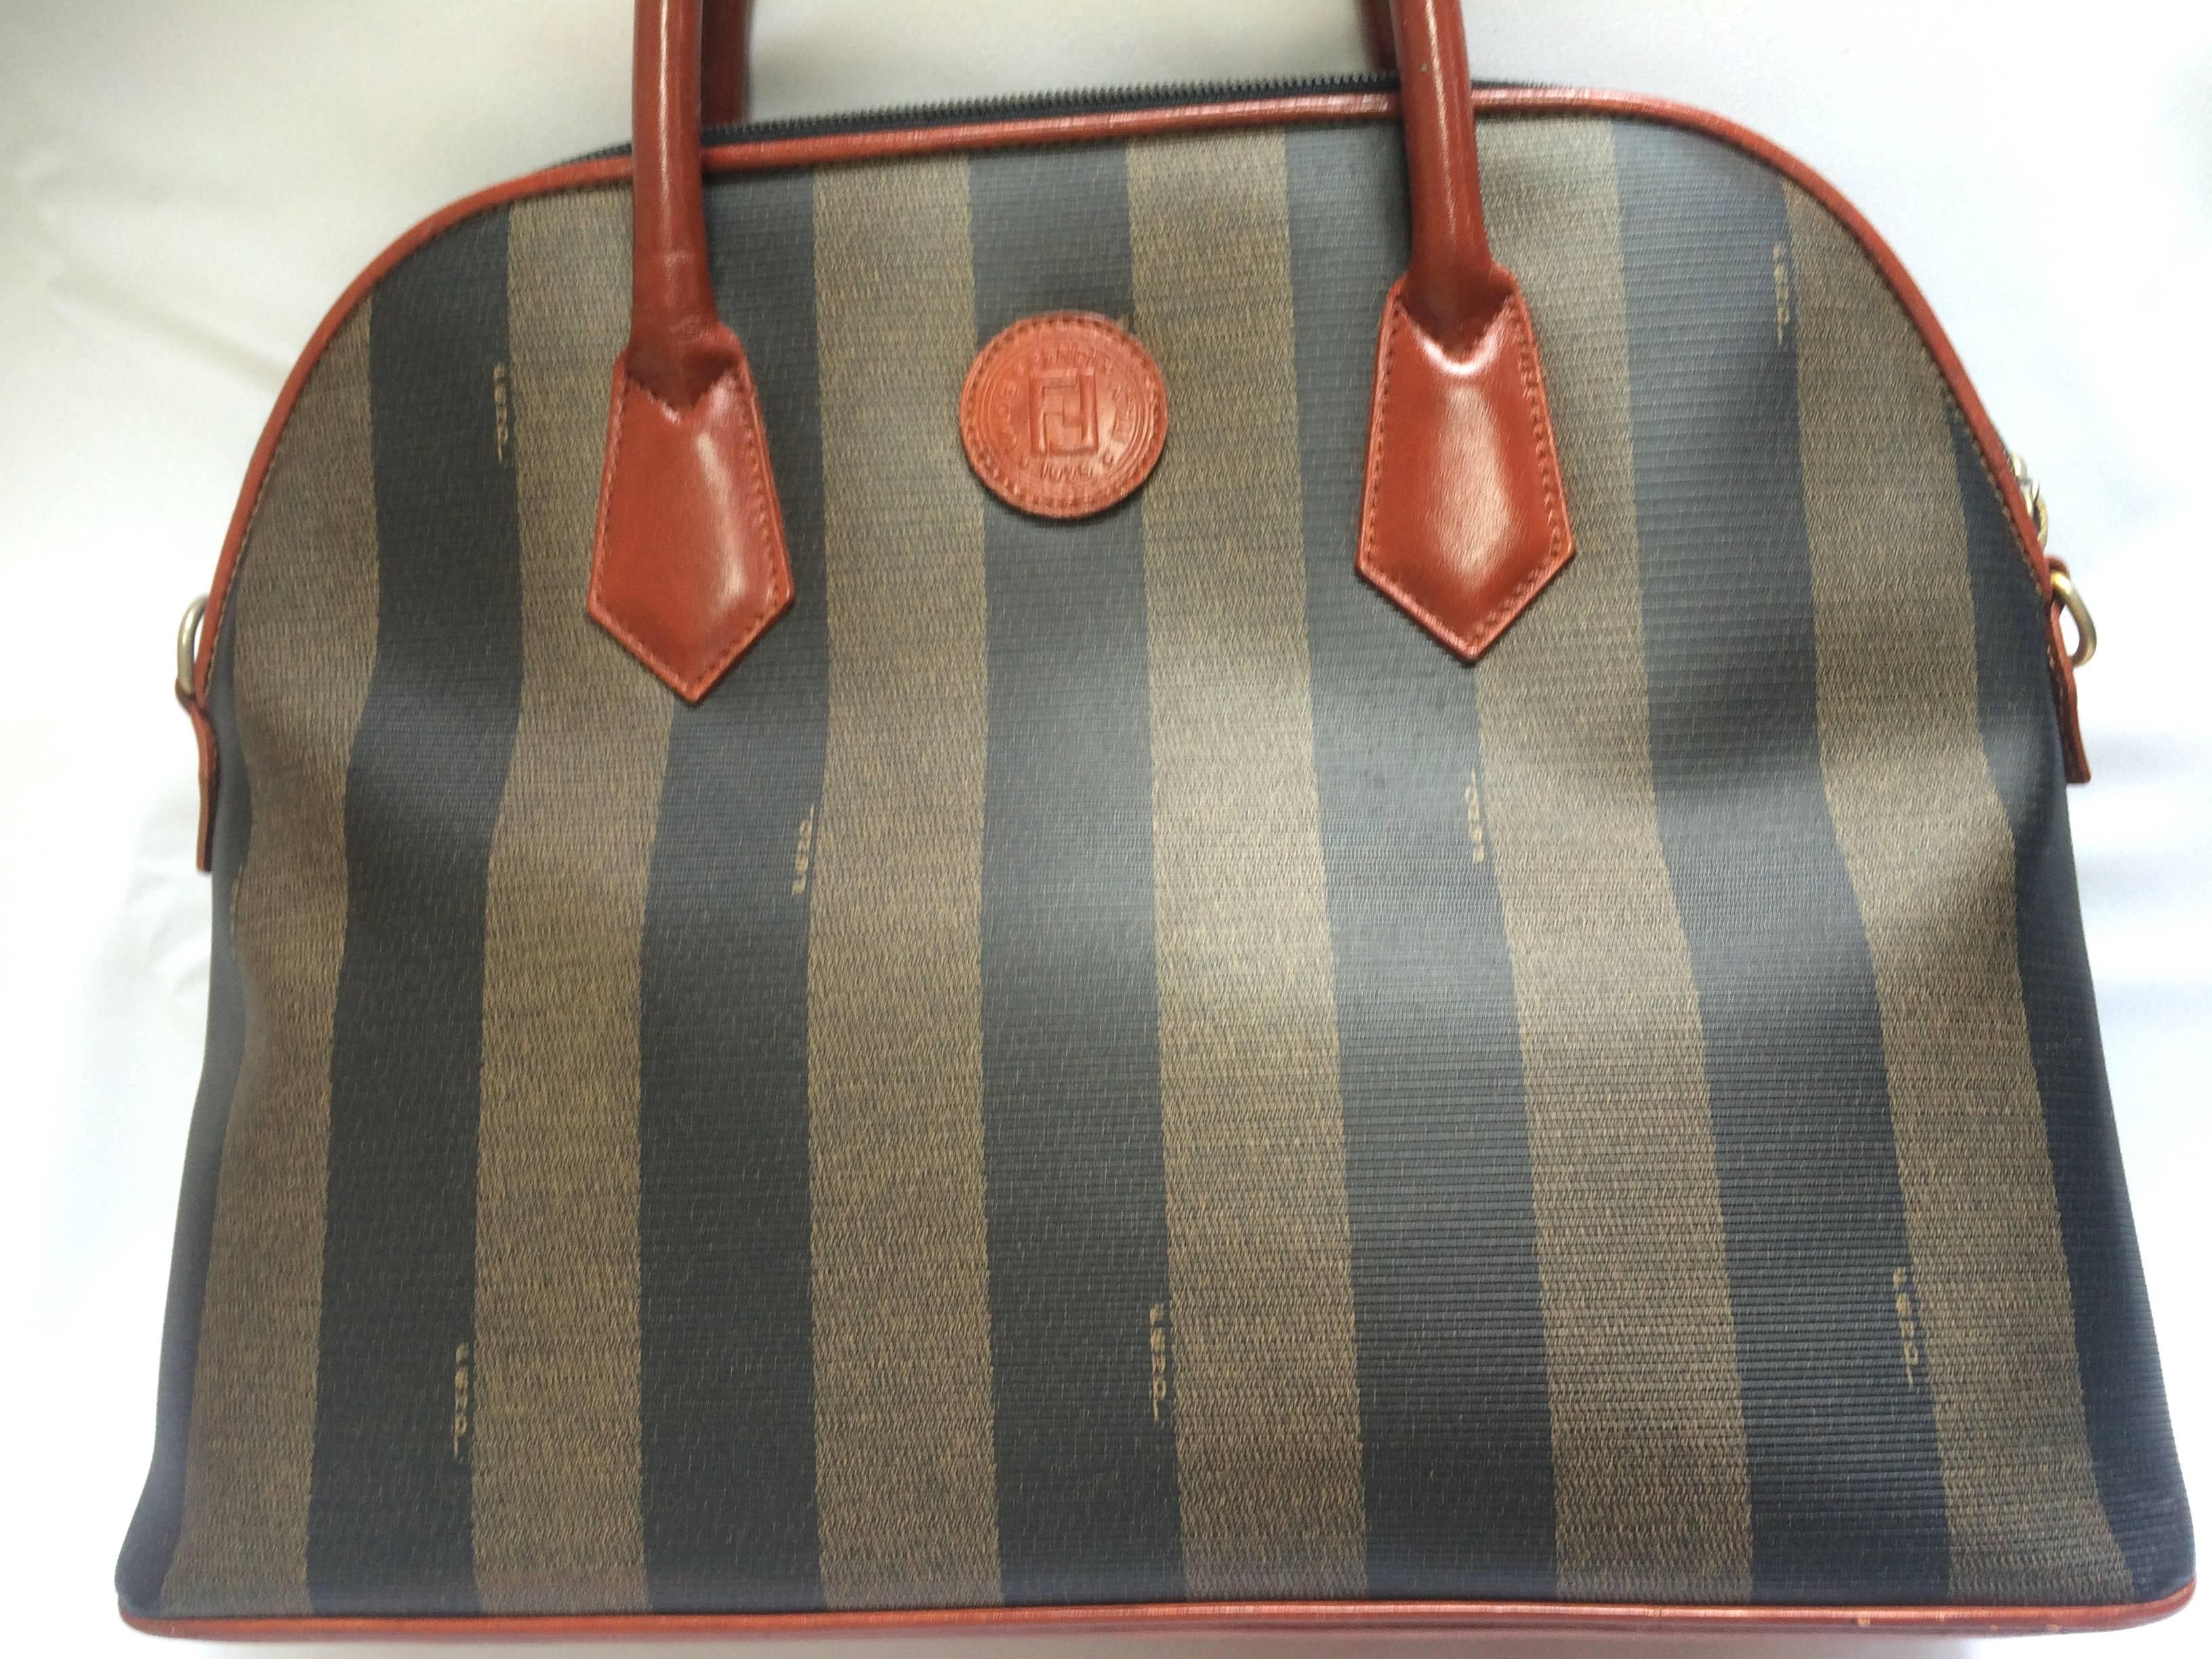 1990s. Vintage FENDI pecan khaki and grey stripe mid size tote bag with brown leather handles and trimmings in bolide shape.

This is a FENDI conic pecan pattern purse in bolide shape from the early 90's. 
Very classic and yet elegant.
Perfect